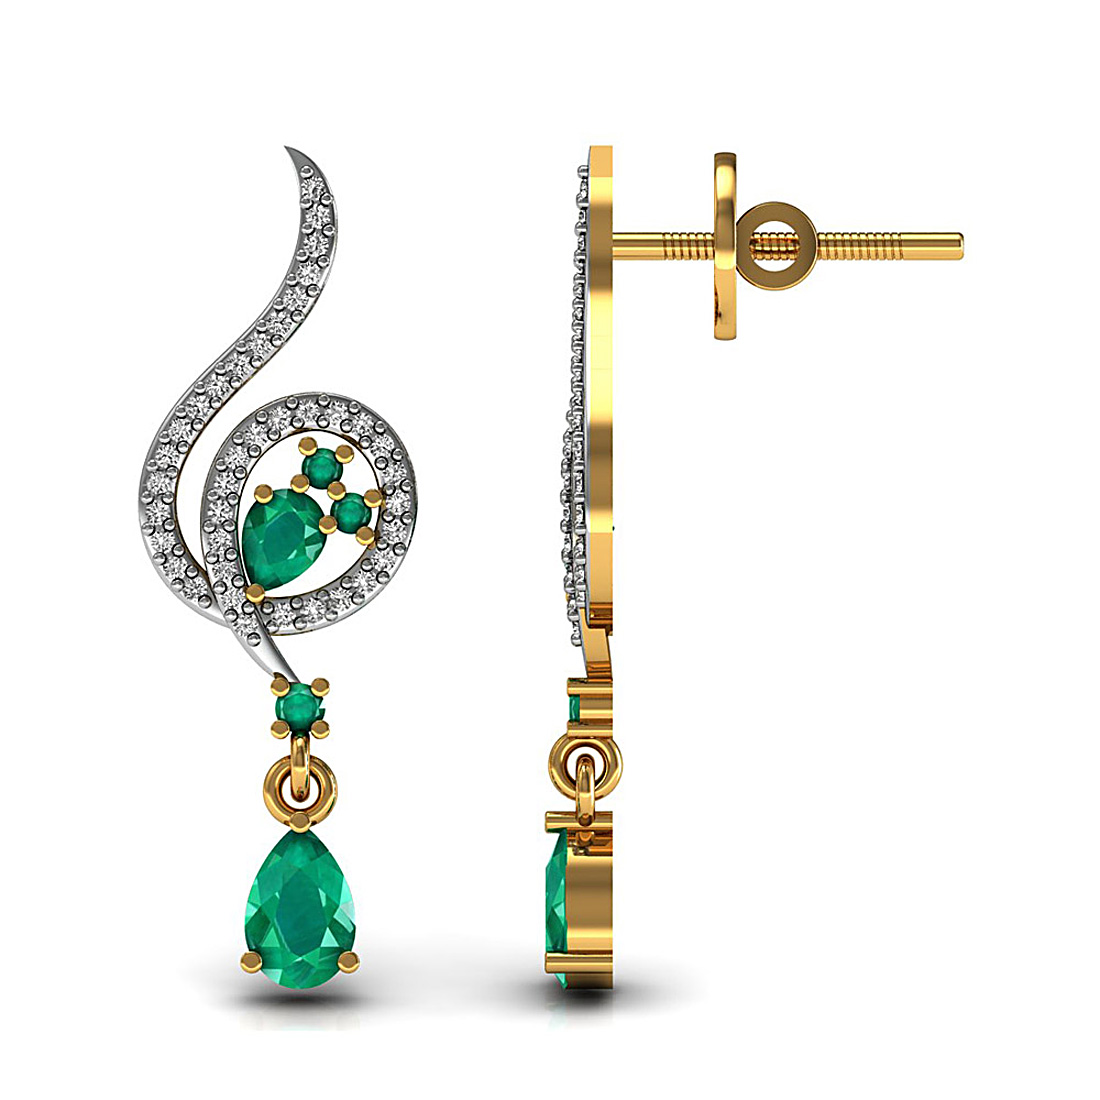 This beautiful pair of drop earrings made in 18k solid yellow gold and studded with natural emerald gemstone.